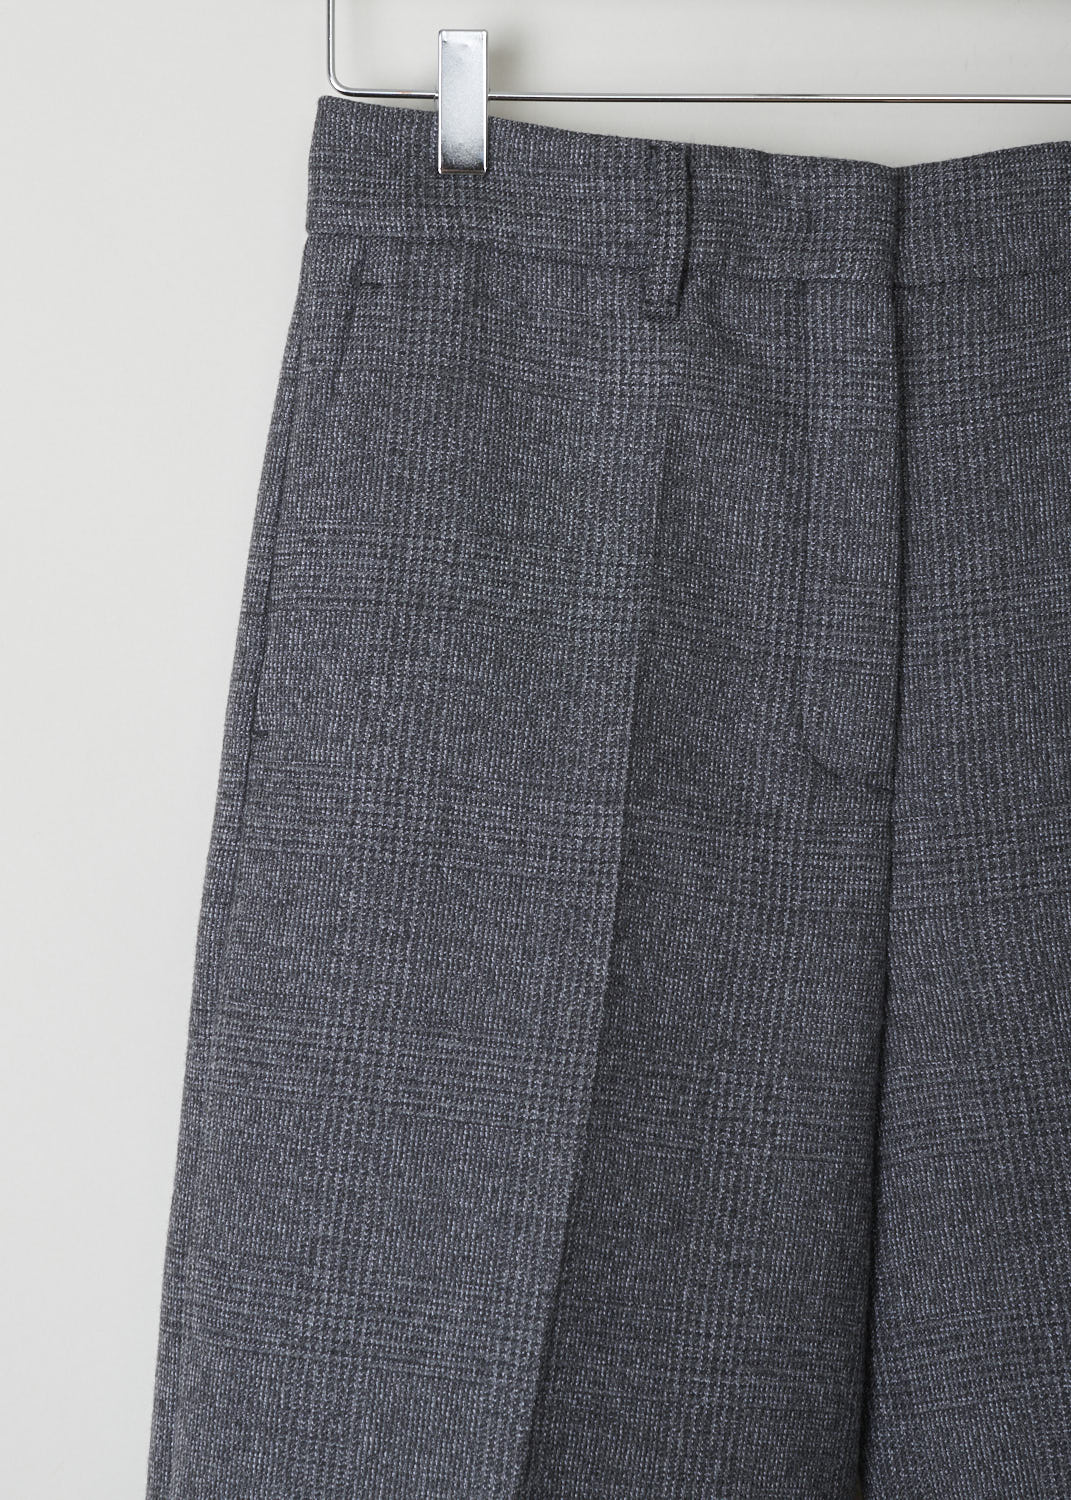 PRADA, GREY TWEED TROUSERS, LJH_GALLES_MOULINE_P293BC_F0480_ARDESIA, Grey, Detail, Sturdy grey tweed trousers. These trousers have belt loops, a clasp and zip fastening, slanted pockets in the front and welt pockets in the back. On the pant legs, centre pleats can be found front and back.
